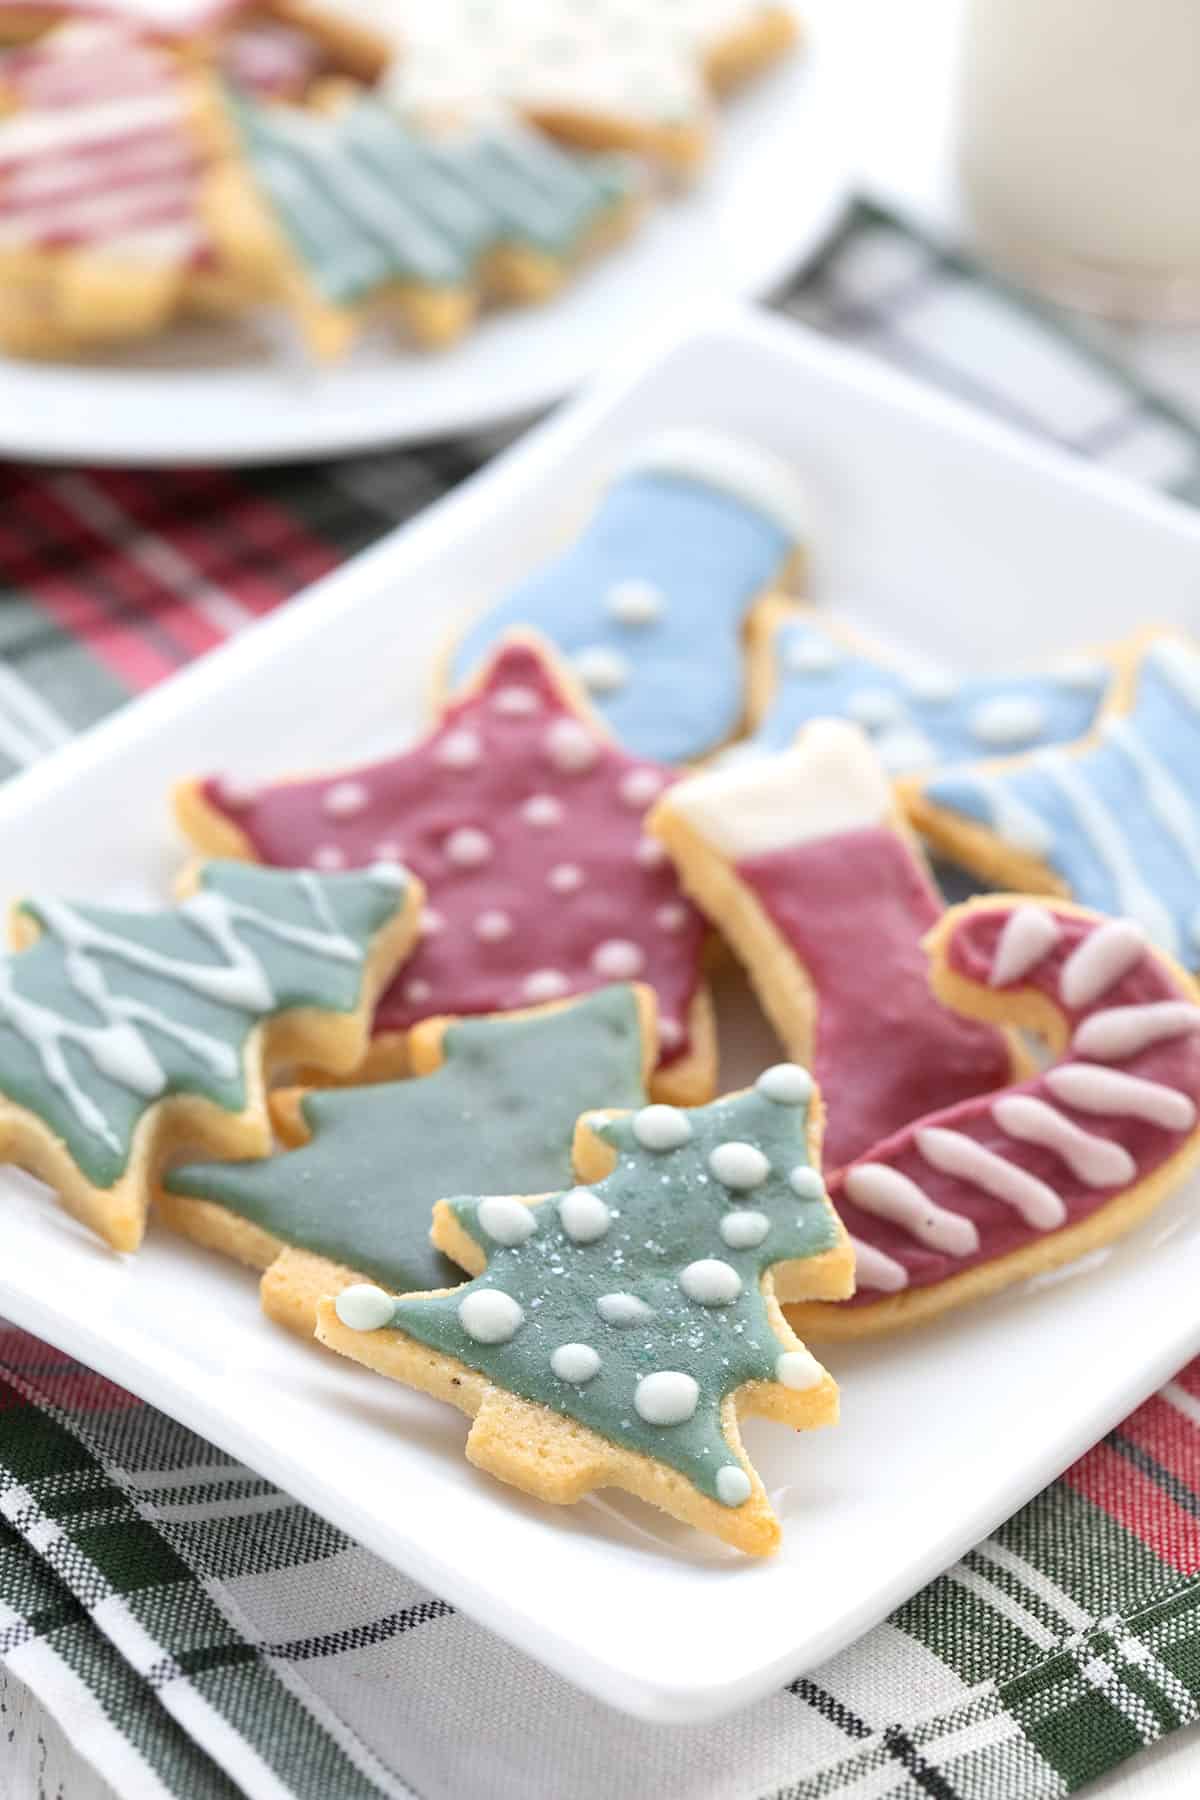 Keto sugar cookies with colorful royal icing on a white plate over a plaid napkin.